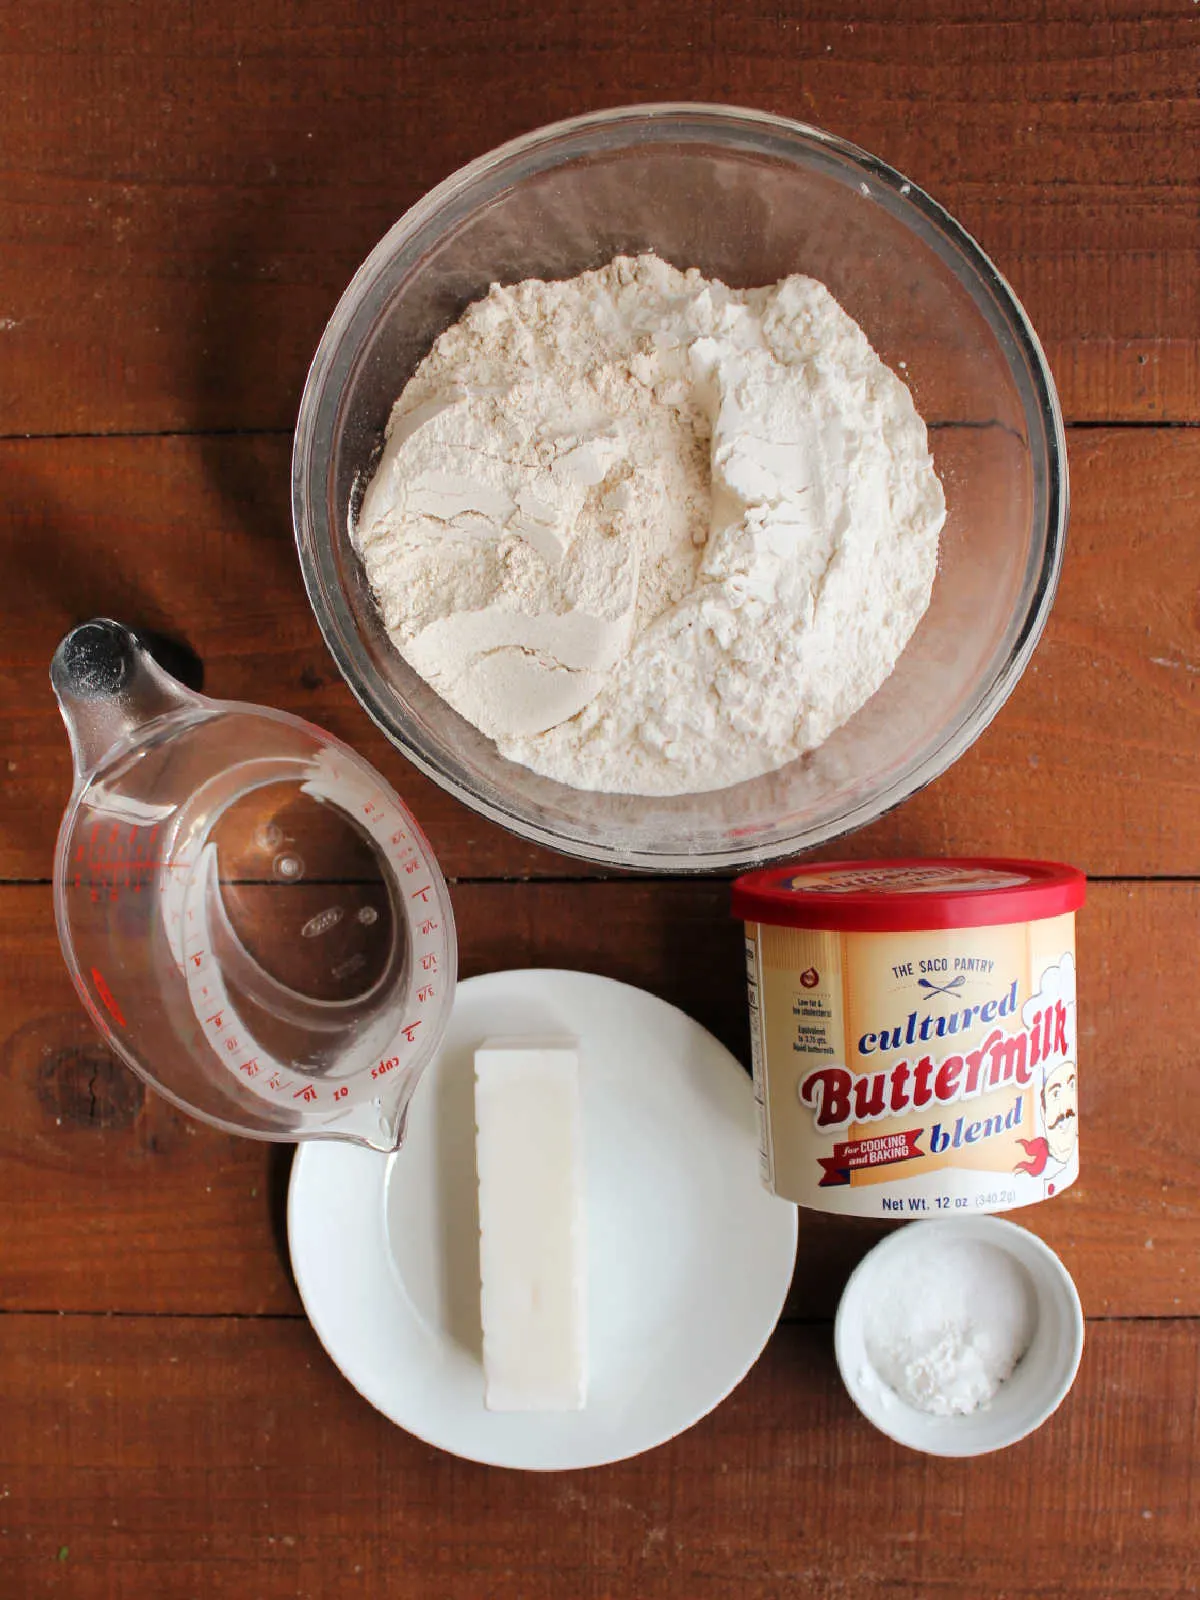 Ingredients including flour, buttermilk powder, baking powder, baking soda, salt, lard and cold water ready to be made into biscuits.